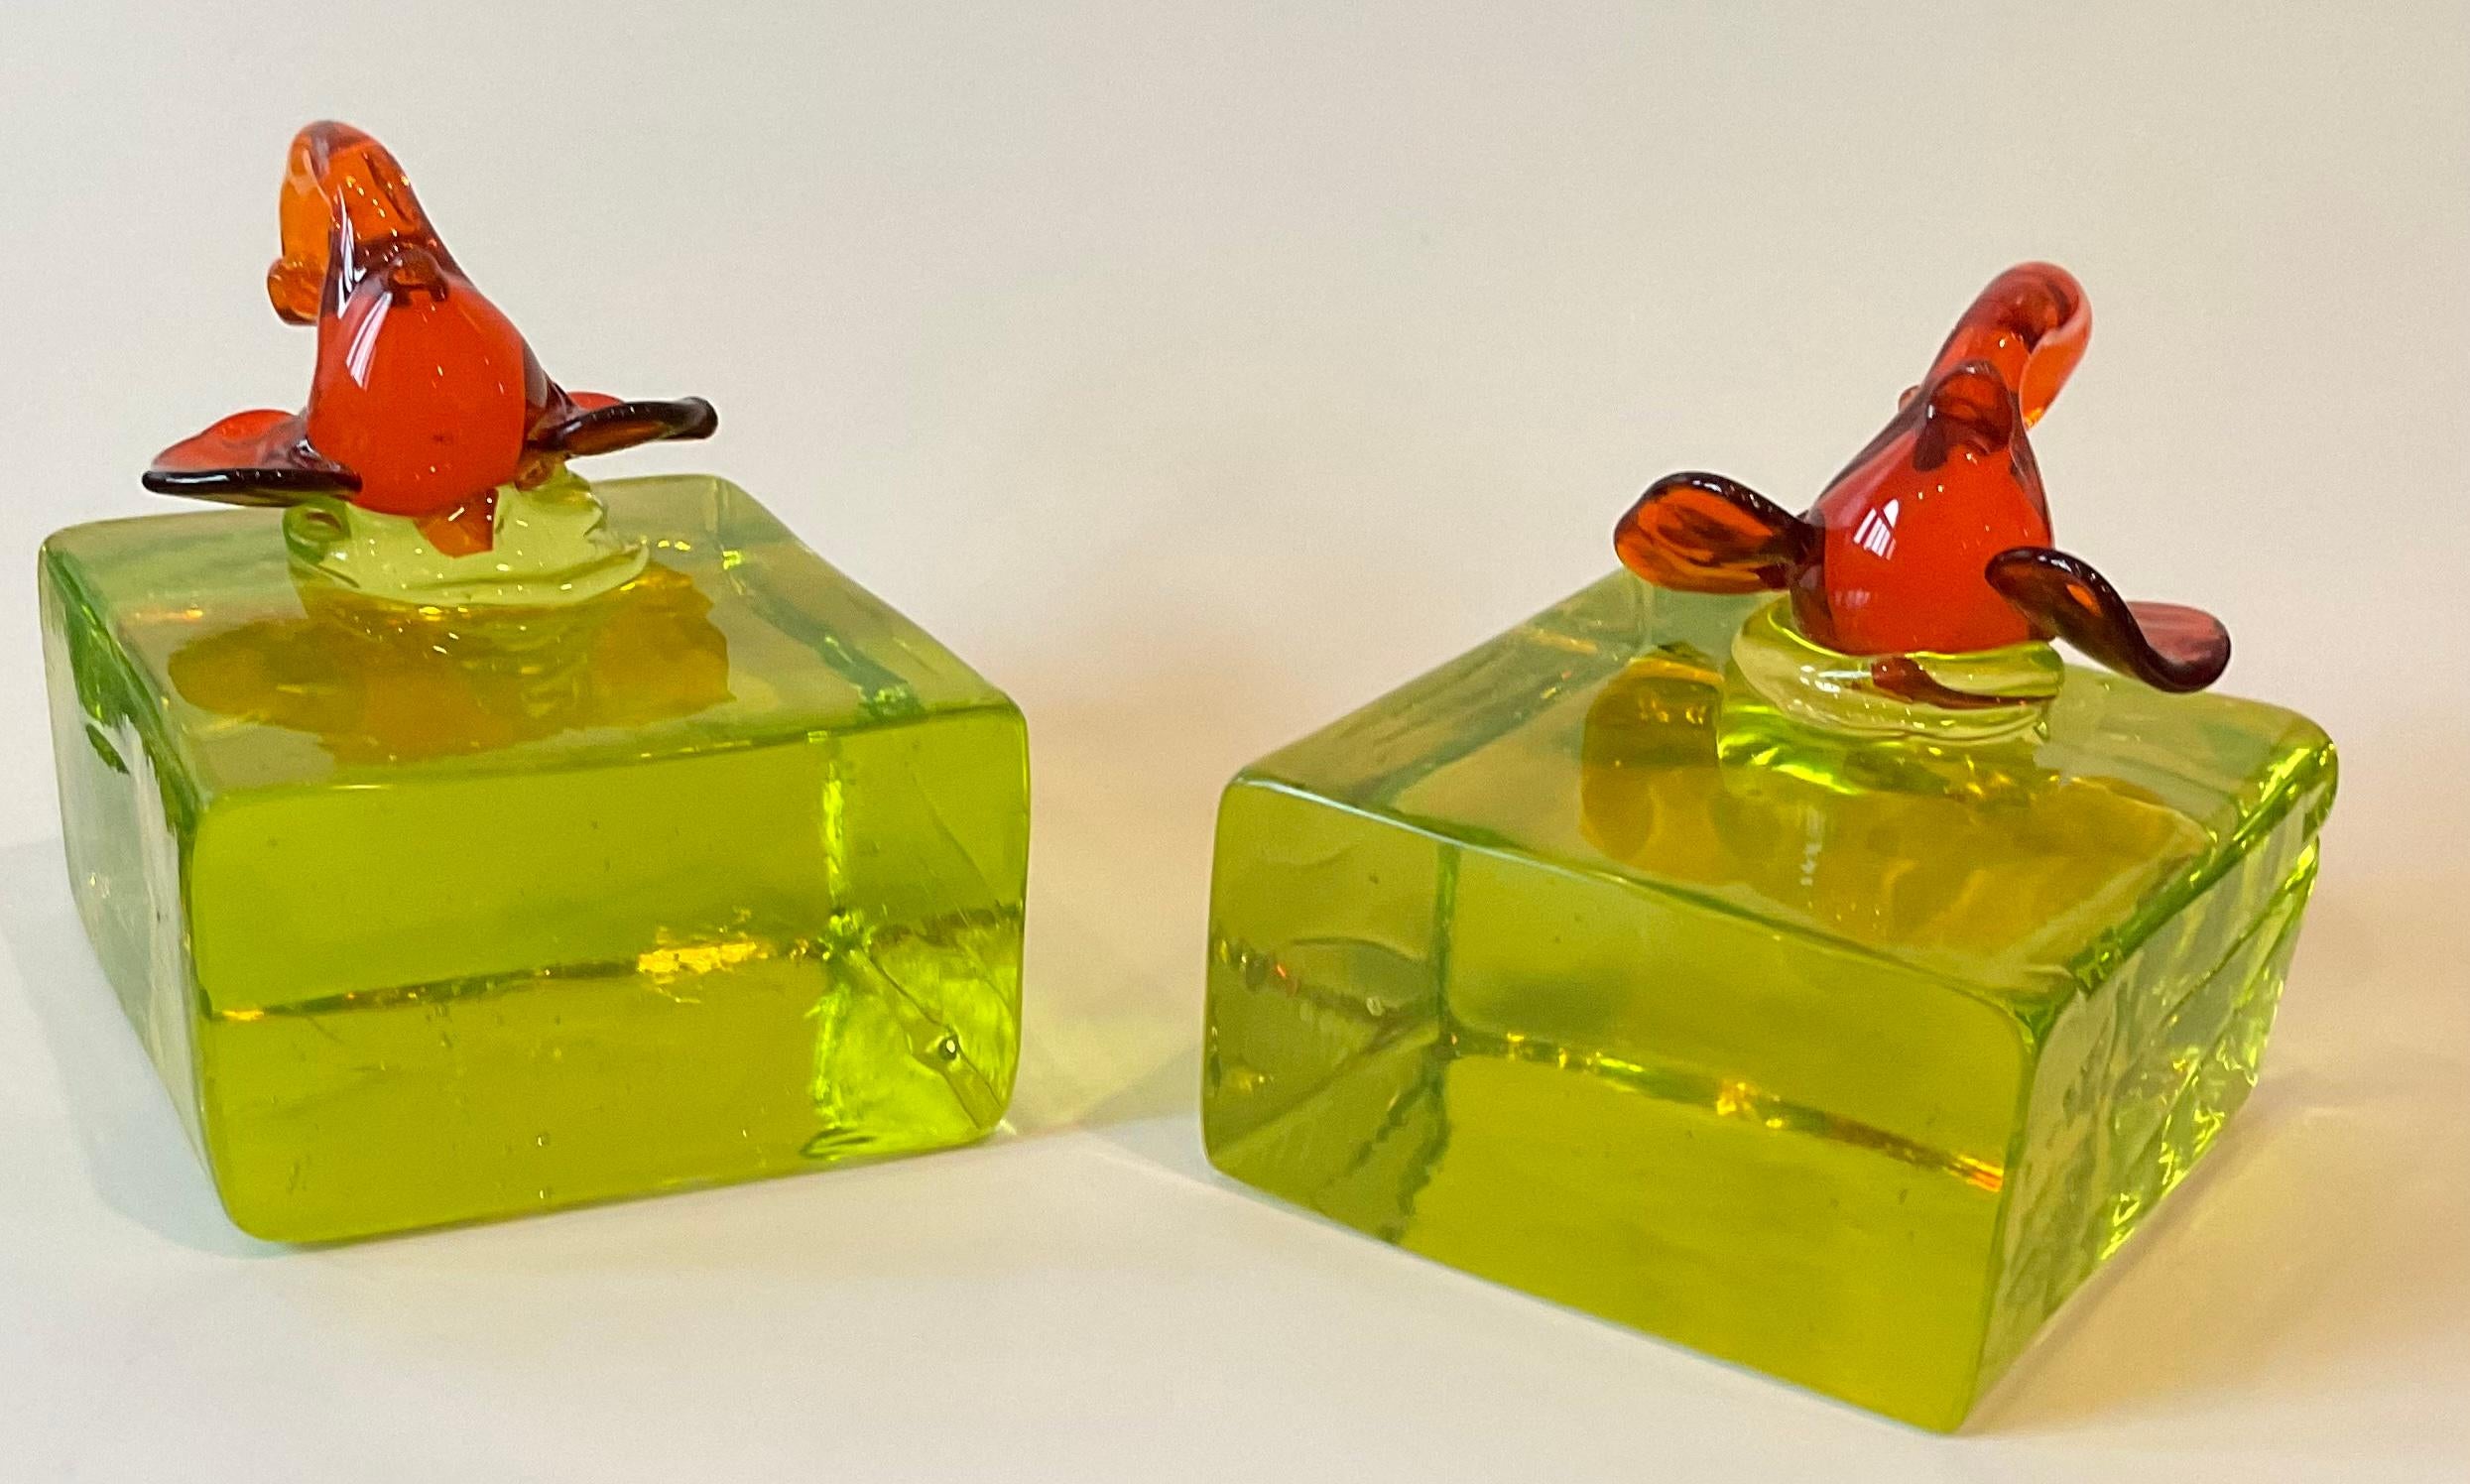 Amazing pair of Murano bookends by Cenedese circa 1950’s. Bookends retain an original label dating them to the 1950’s. Thick Vaseline glass with applied elephants. 

At the end of World War II, in 1946, after being tutored by various glass